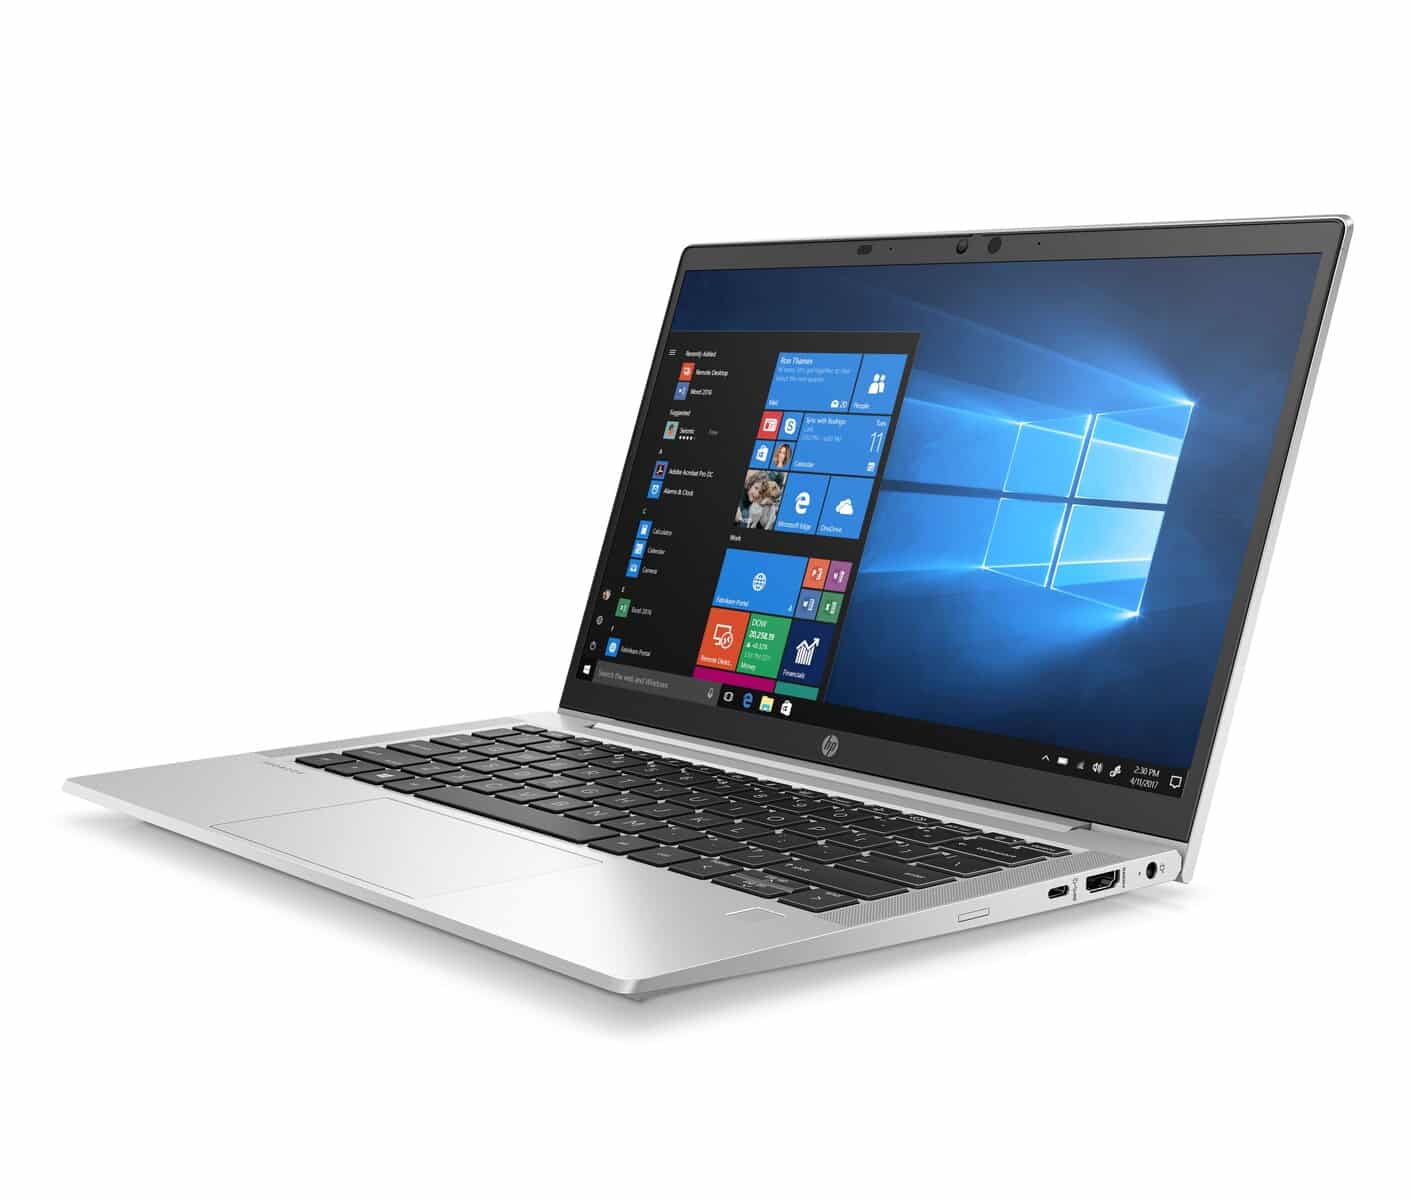 HP ProBook 635 Aero G7 with AMD 4000 Series Processor Launched